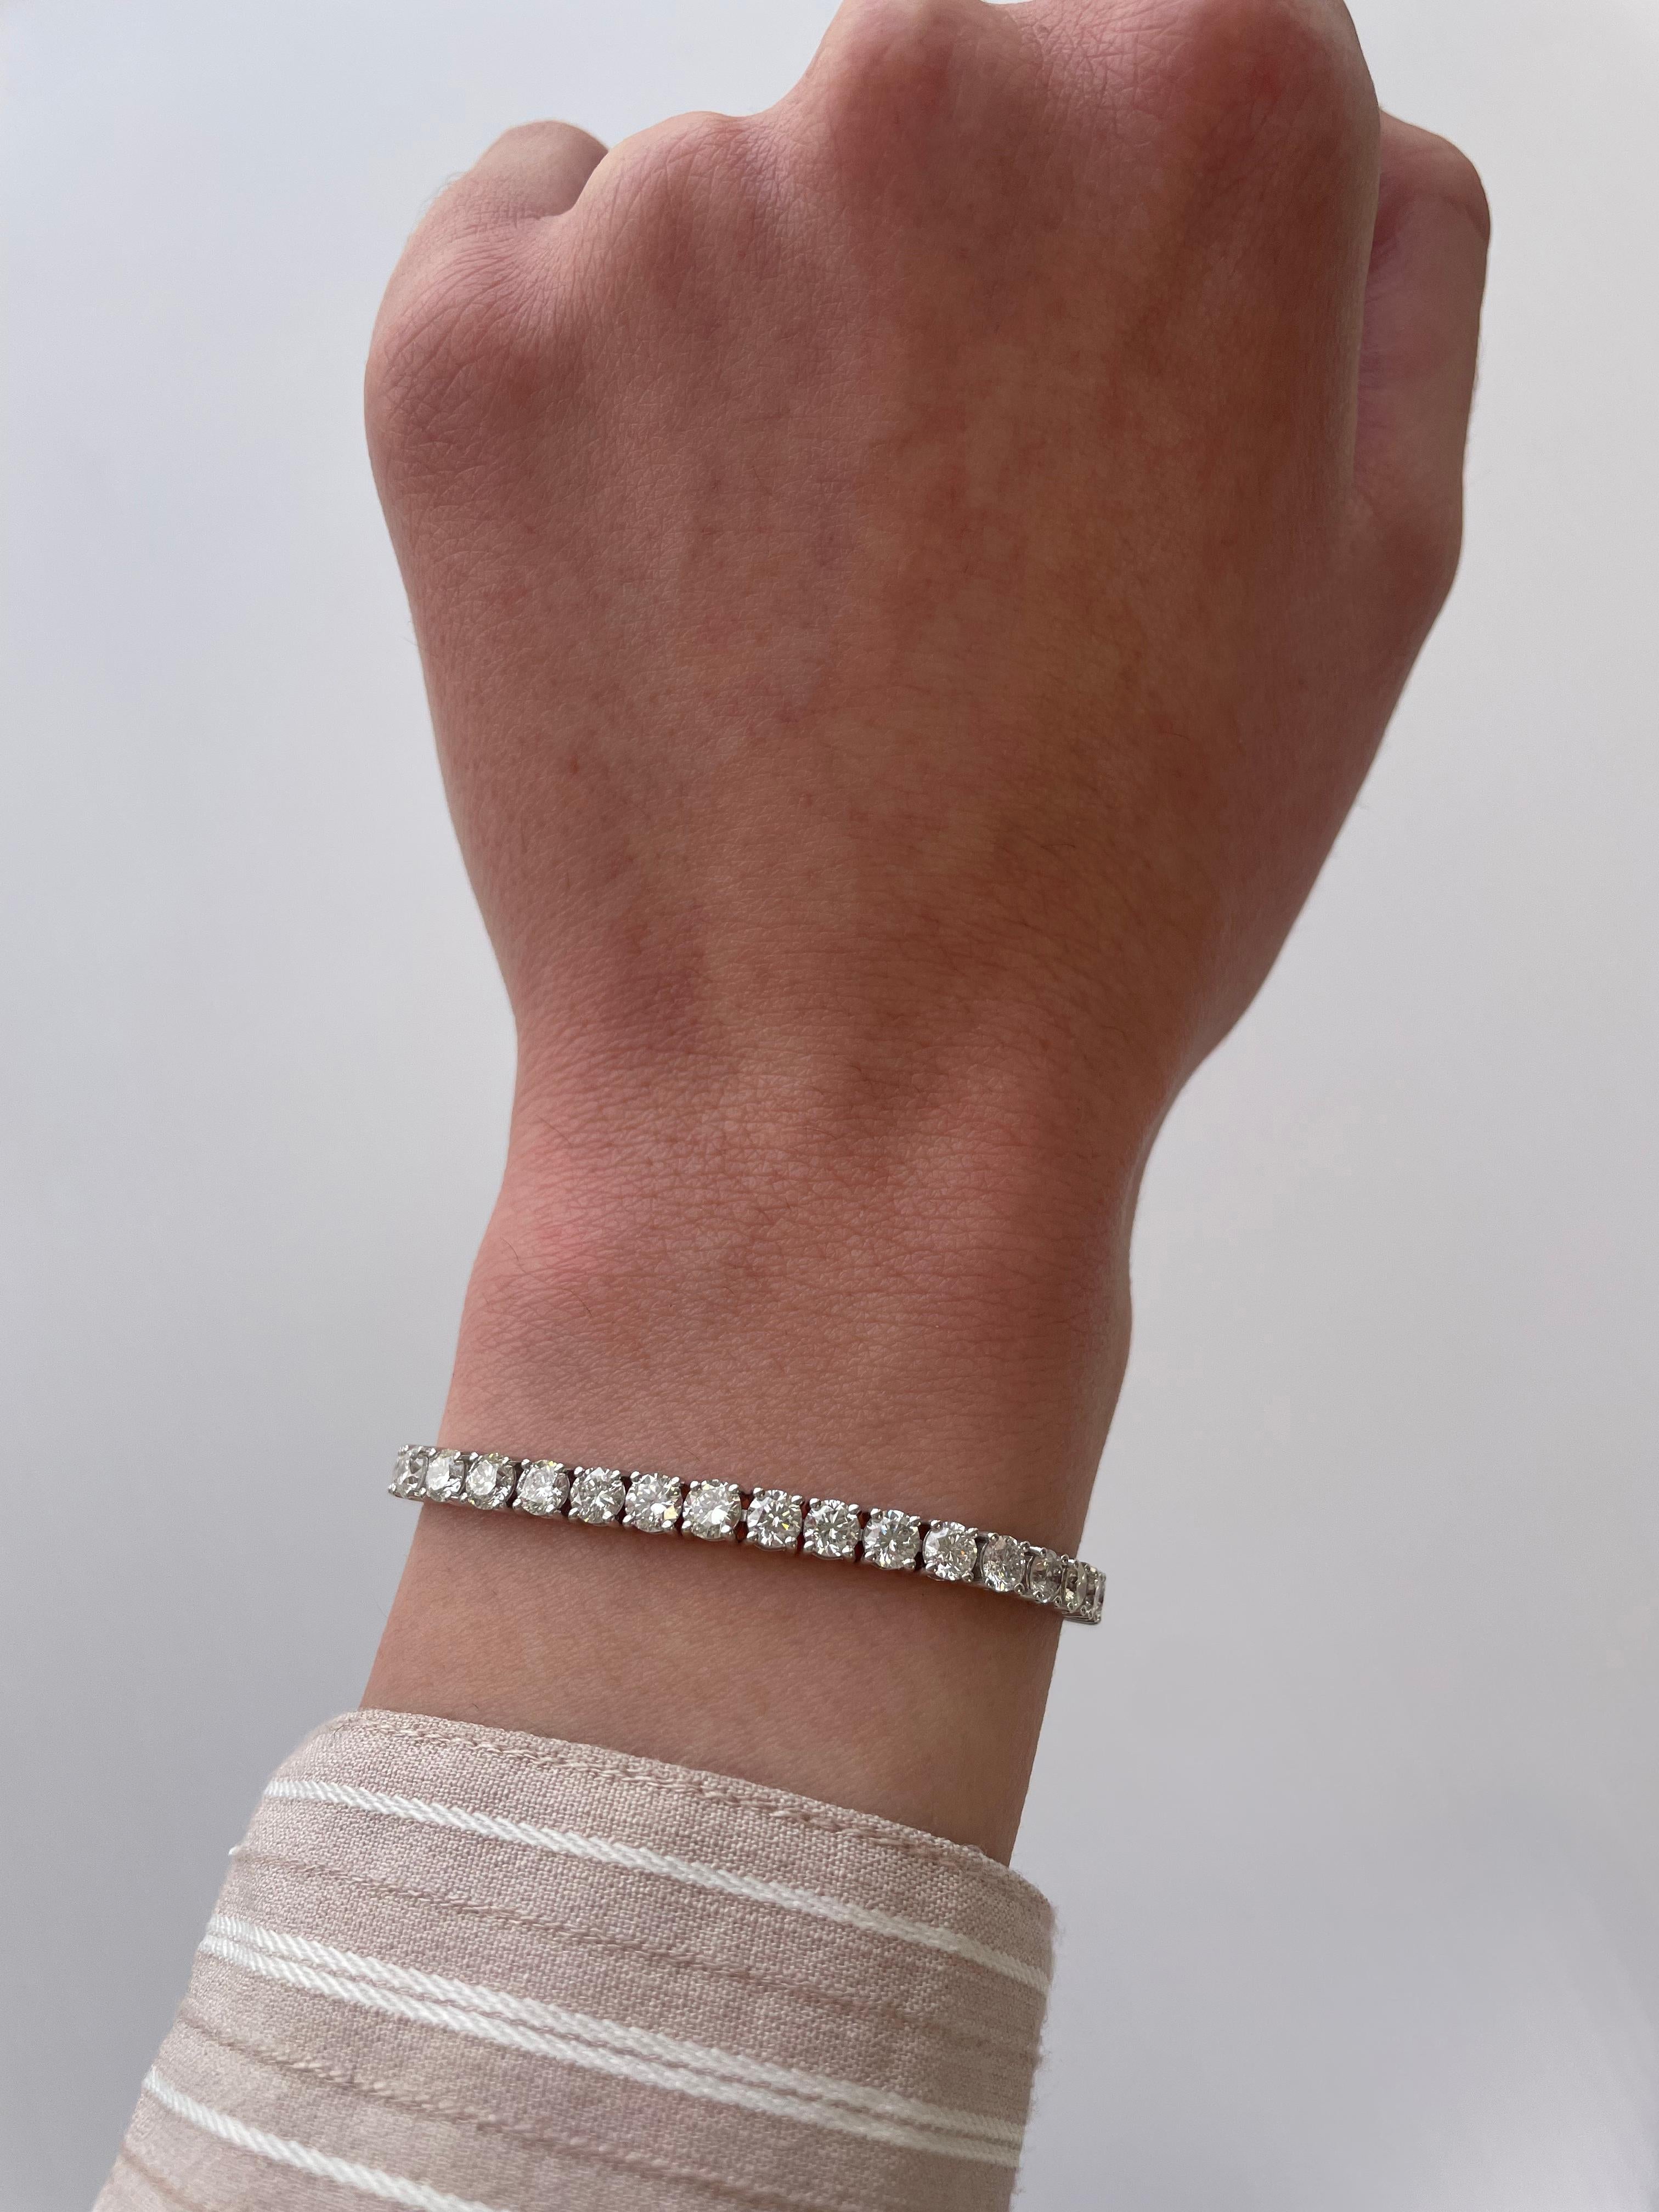 Exquisite and timeless diamonds tennis bracelet, by Alexander Beverly Hills.
45 round brilliant diamonds, 8.90 carats. Approximately D-F color and SI clarity. Four prong set in 18k white gold, 11.12 grams, 7 inches. 
Accommodated with an up-to-date